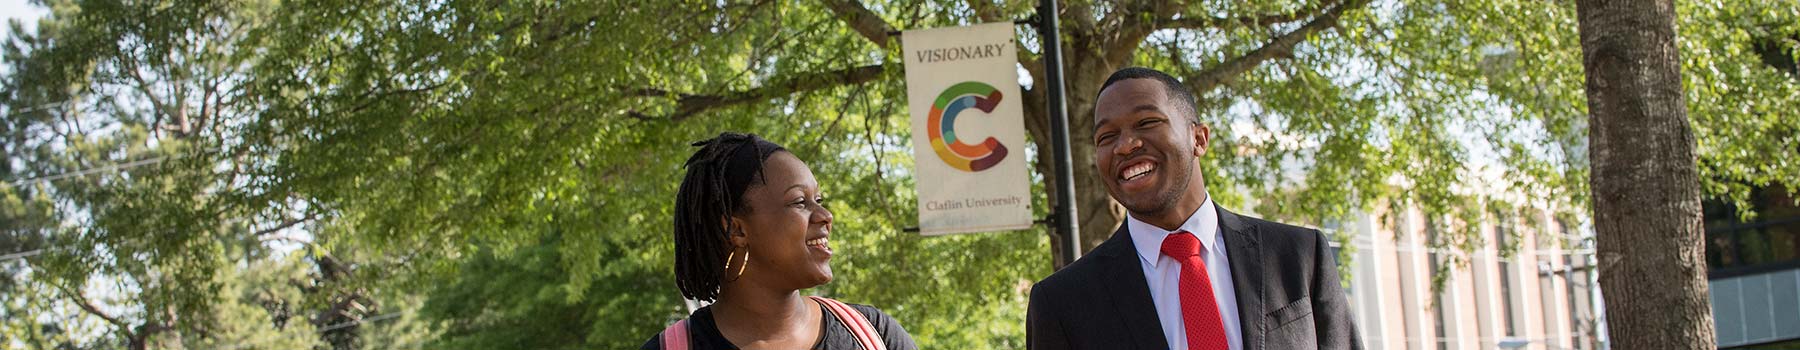 A man and a woman of color, smiling under the shade of trees in the Claflin University